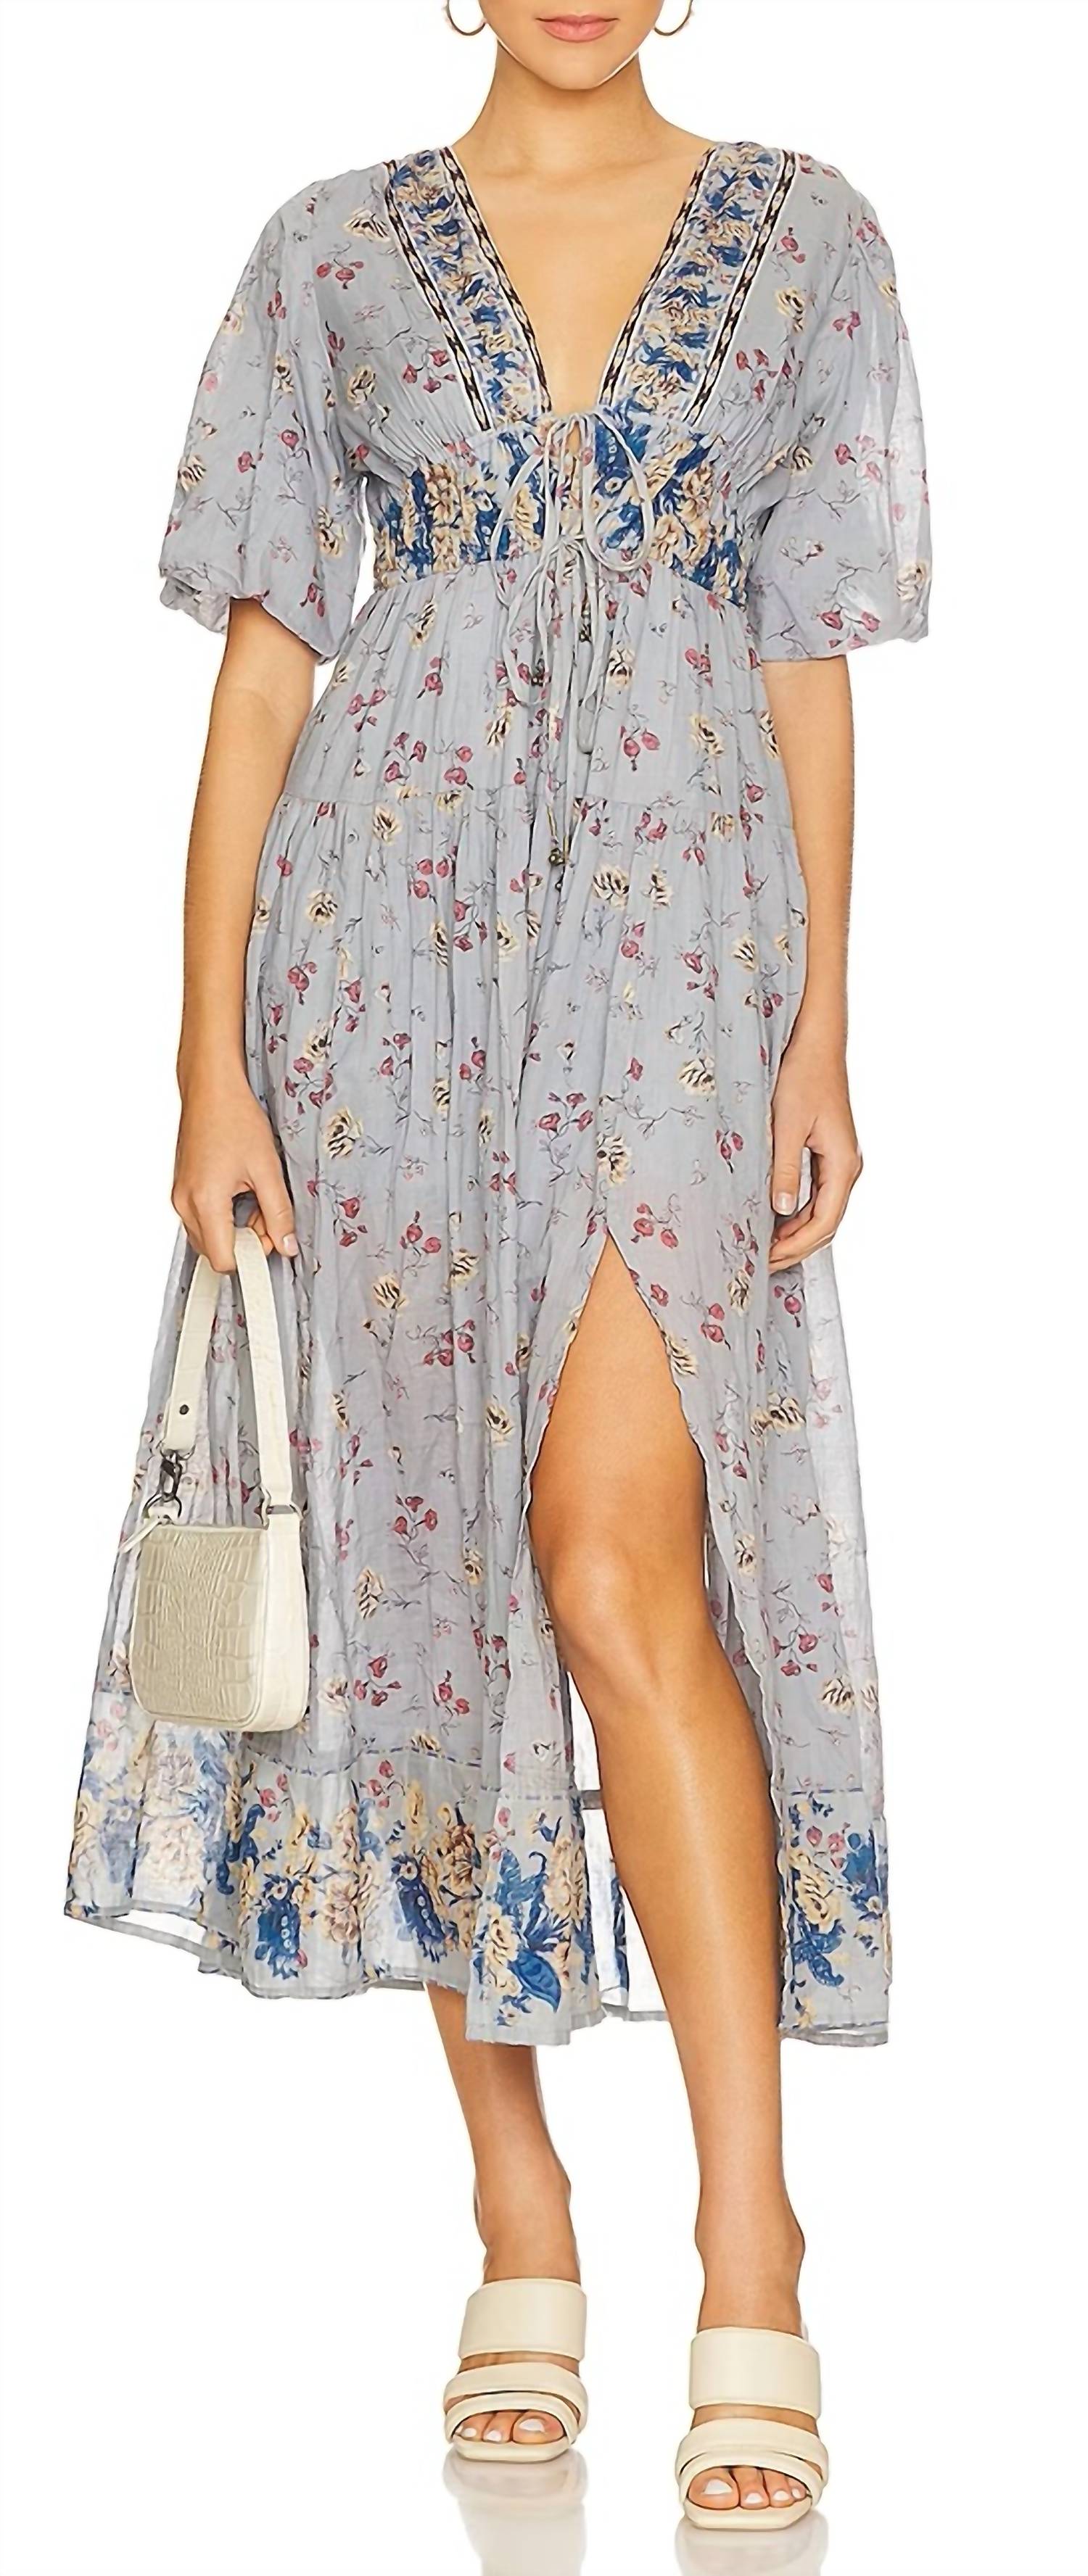 FREE PEOPLE Lysette Maxi Dress in Bluebell Combo